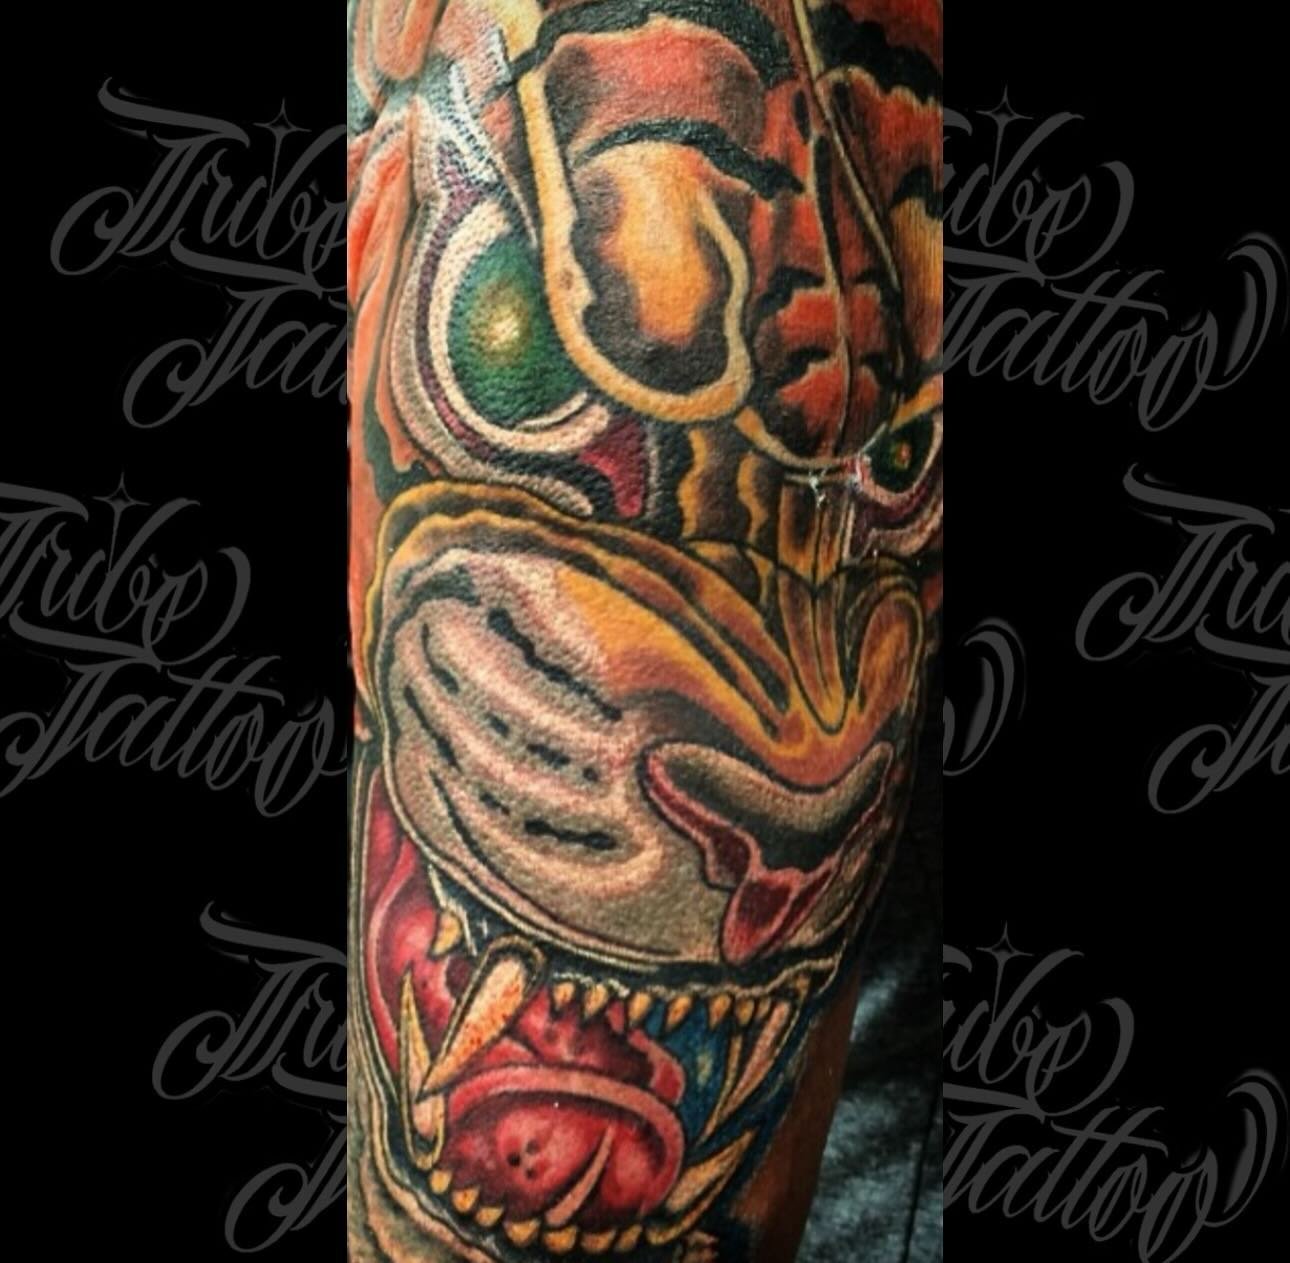 @slaughter698tribe with this insane tiger piece 🔥
.
Give the shop a call to book with @slaughter698tribe 
.
720.904.8904
.
Using #fusion_ink #dynamiccolor #kingpintattoosupply #cainforge